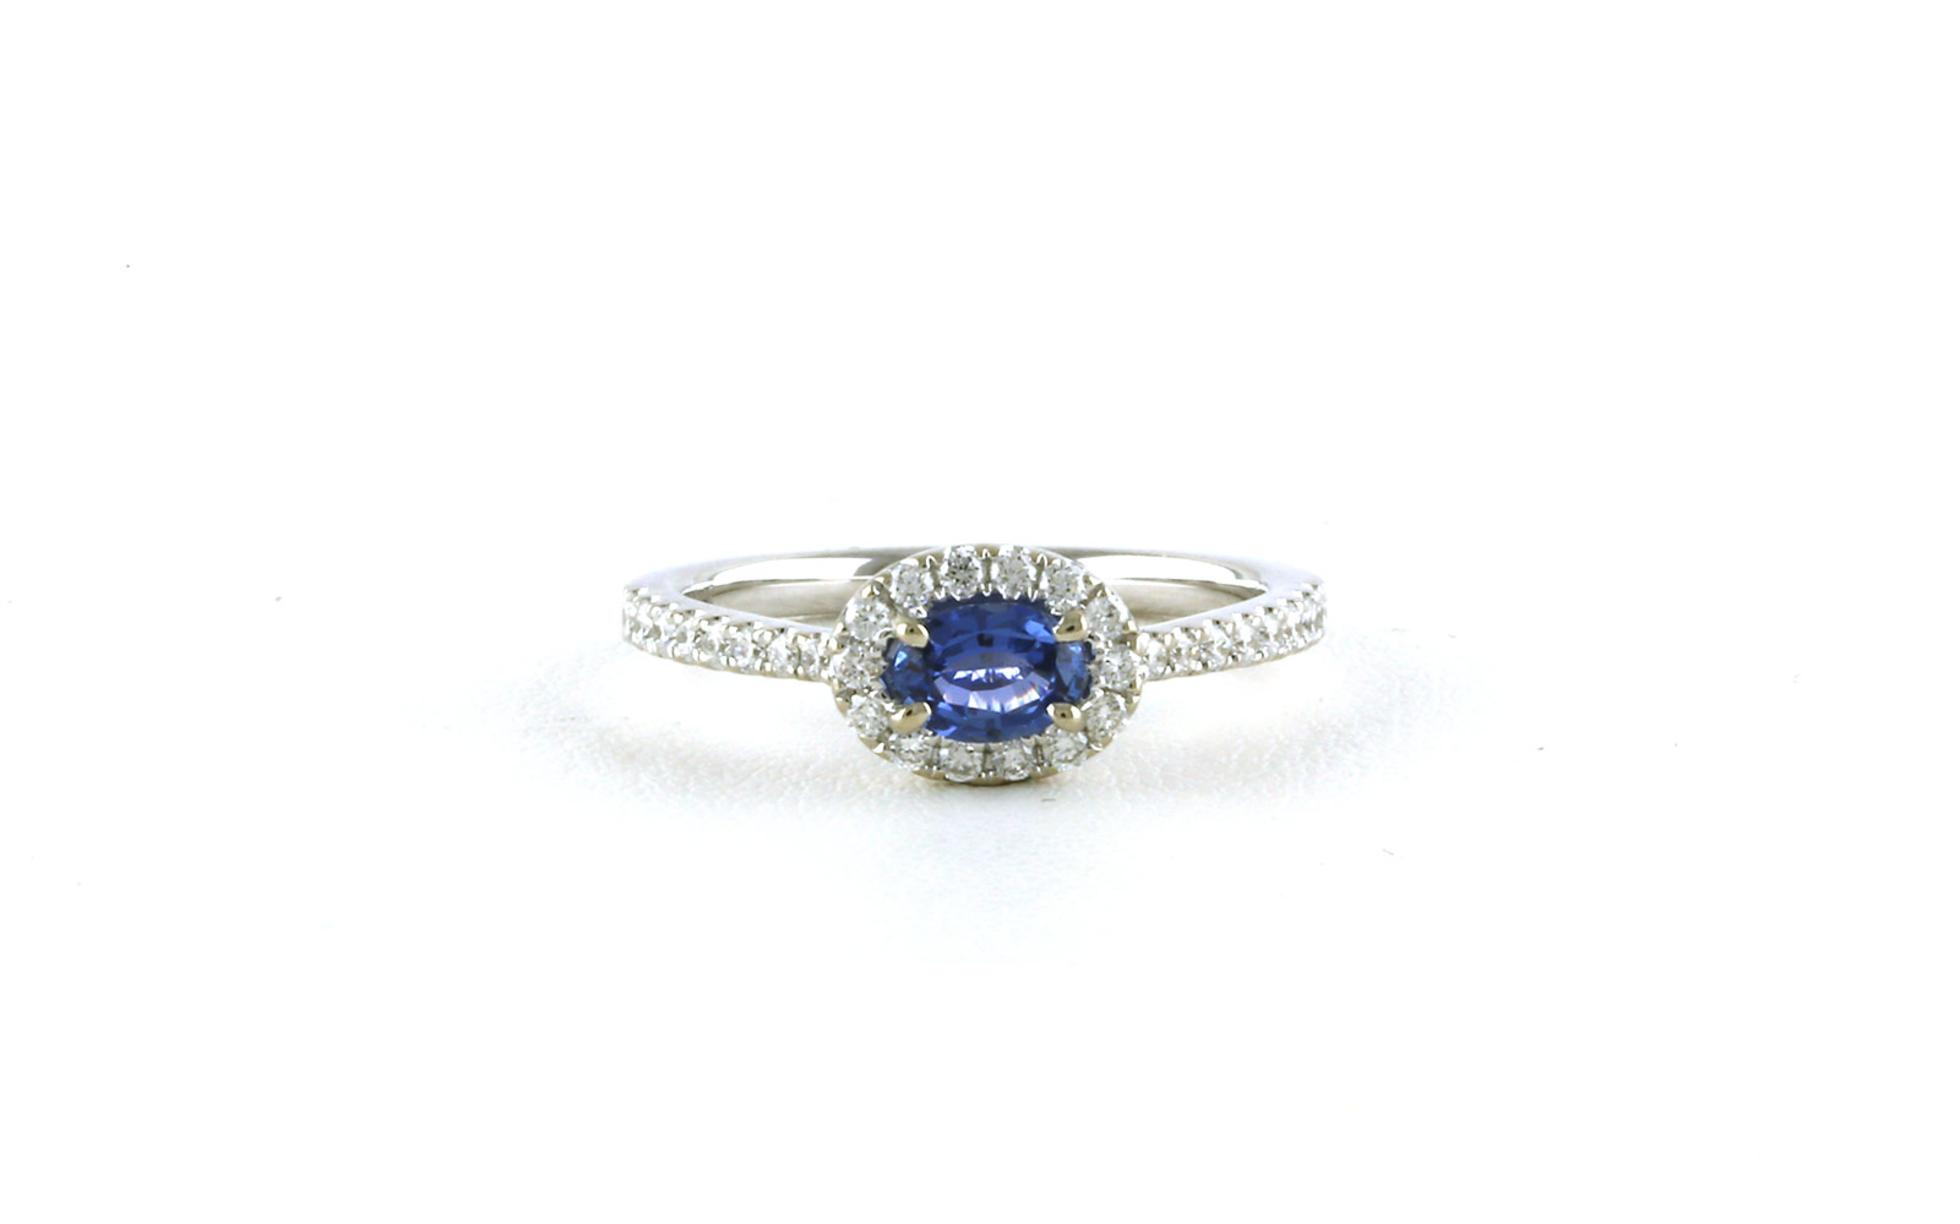 Halo-style Sideways Oval-cut Montana Yogo Sapphire and Diamond Ring in White Gold (0.64cts TWT)